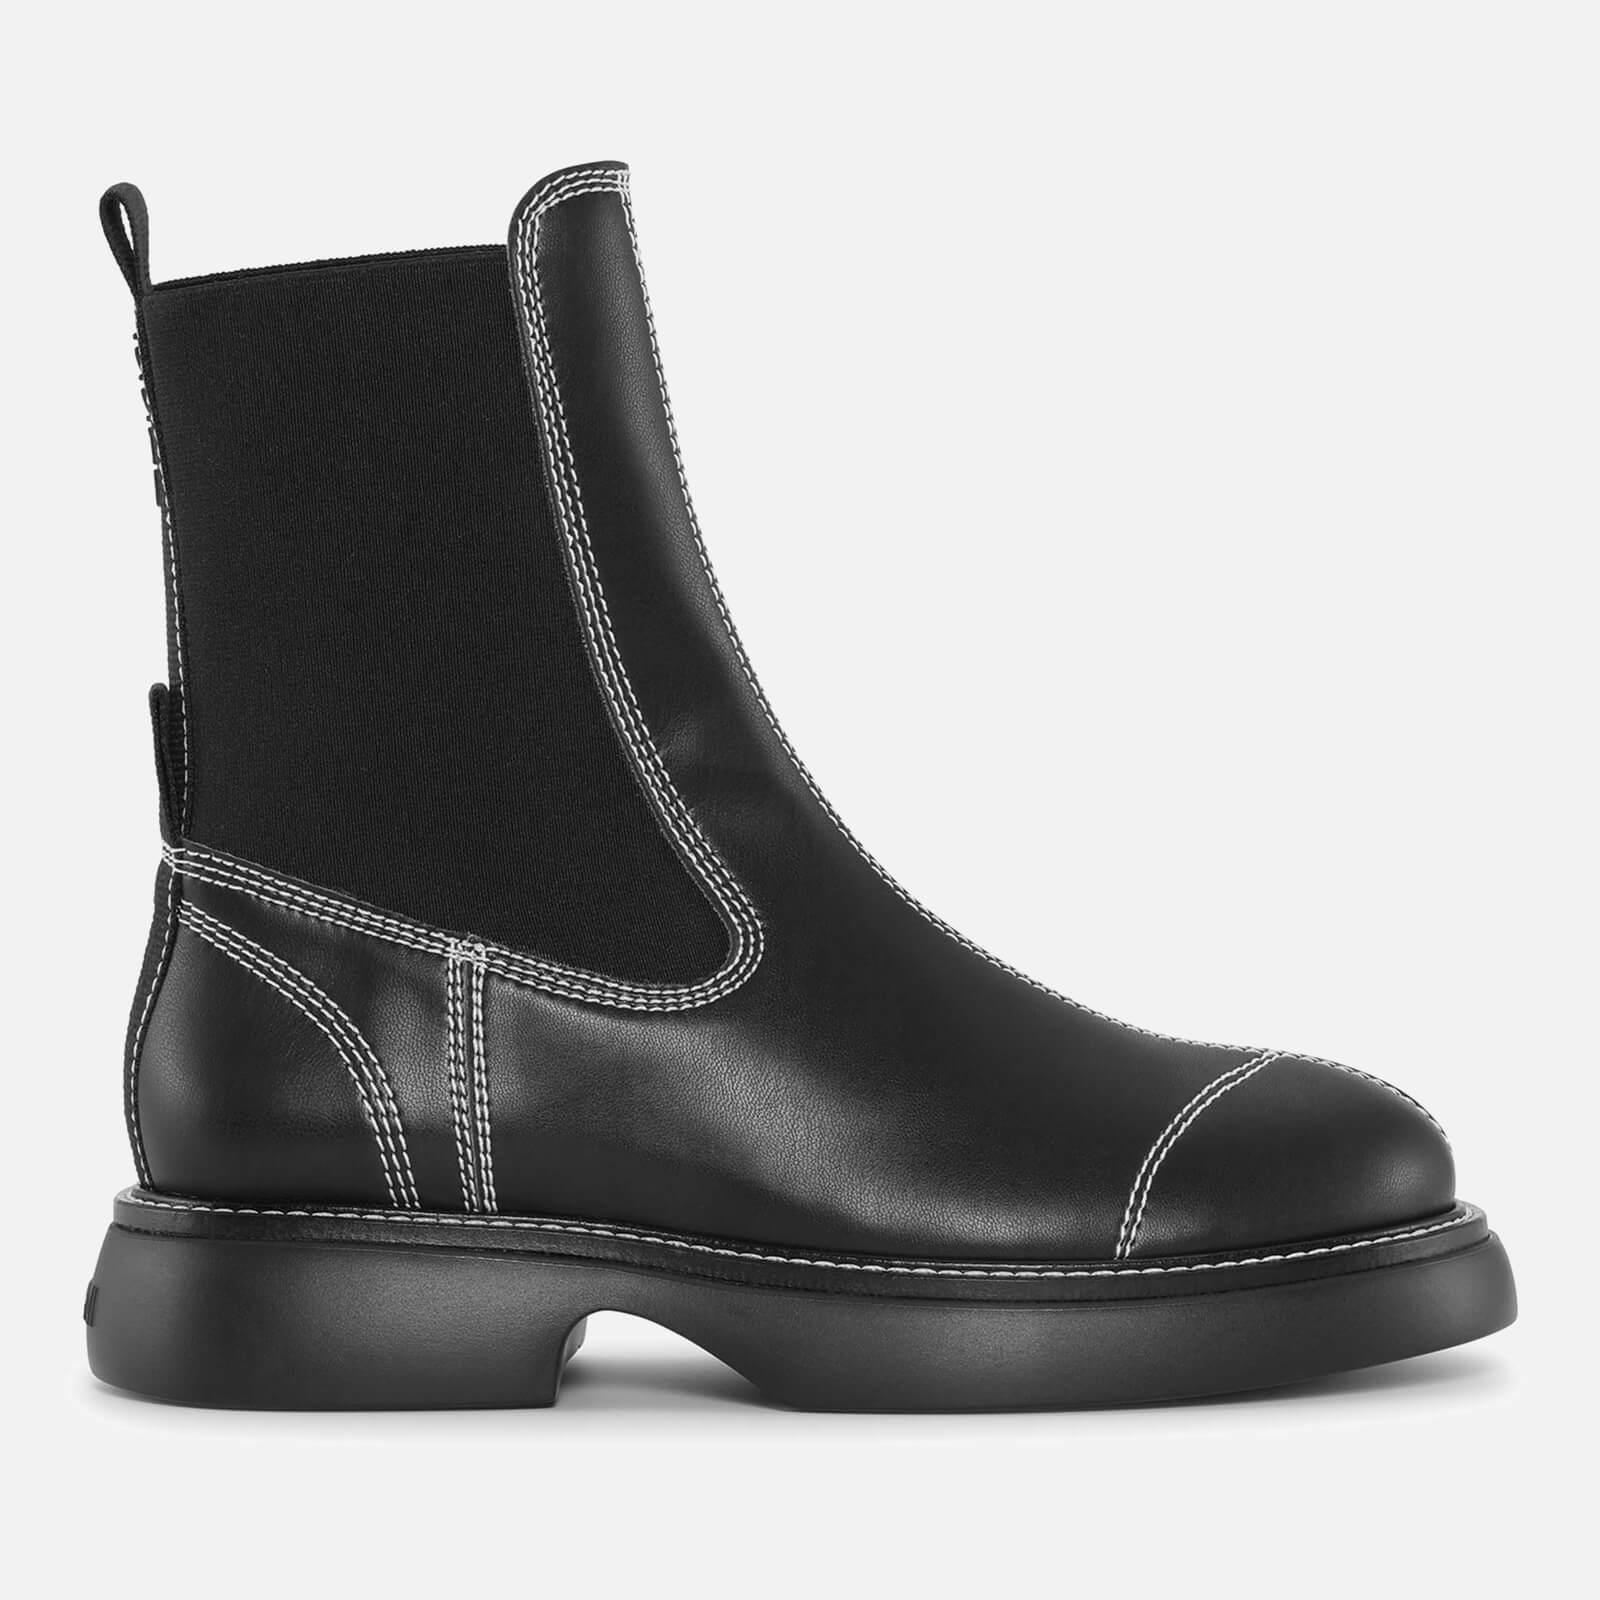 Ganni Everyday Mid Faux Leather Chelsea Boots in Black | Lyst